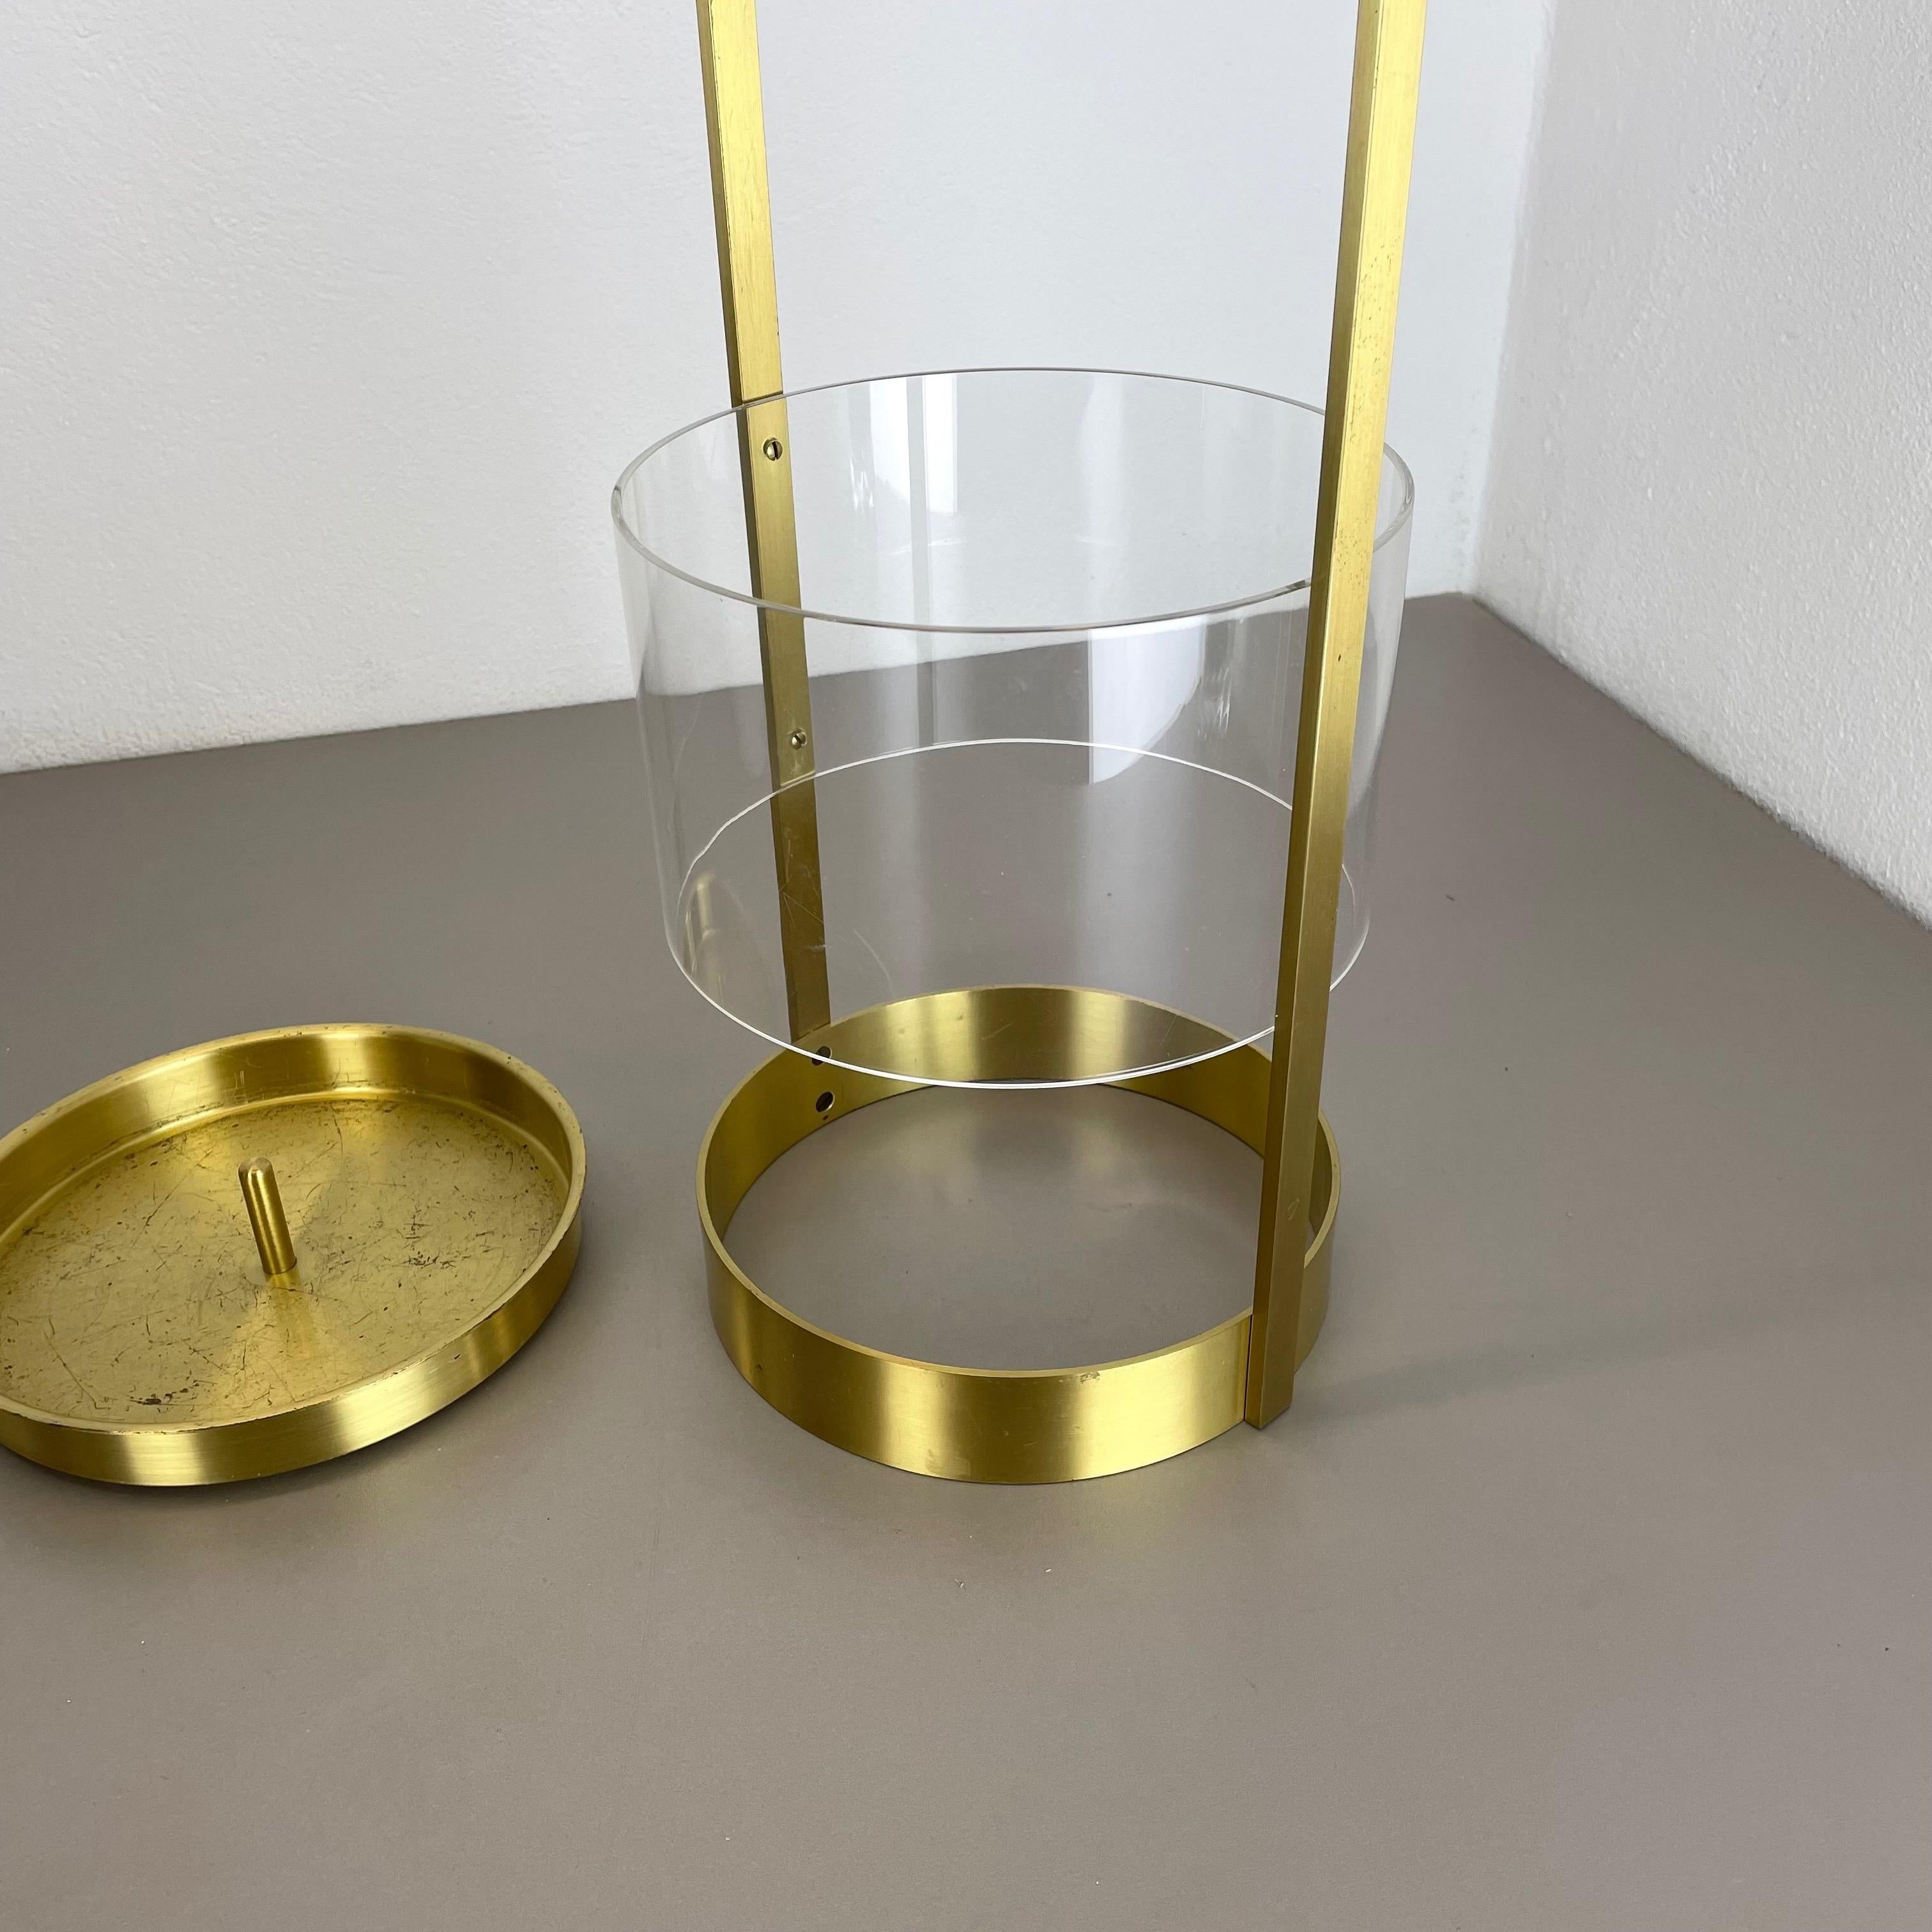 Original Hollywood Regency Solid Brass Acryl Glass Umbrella Stand, Italy, 1970s For Sale 11